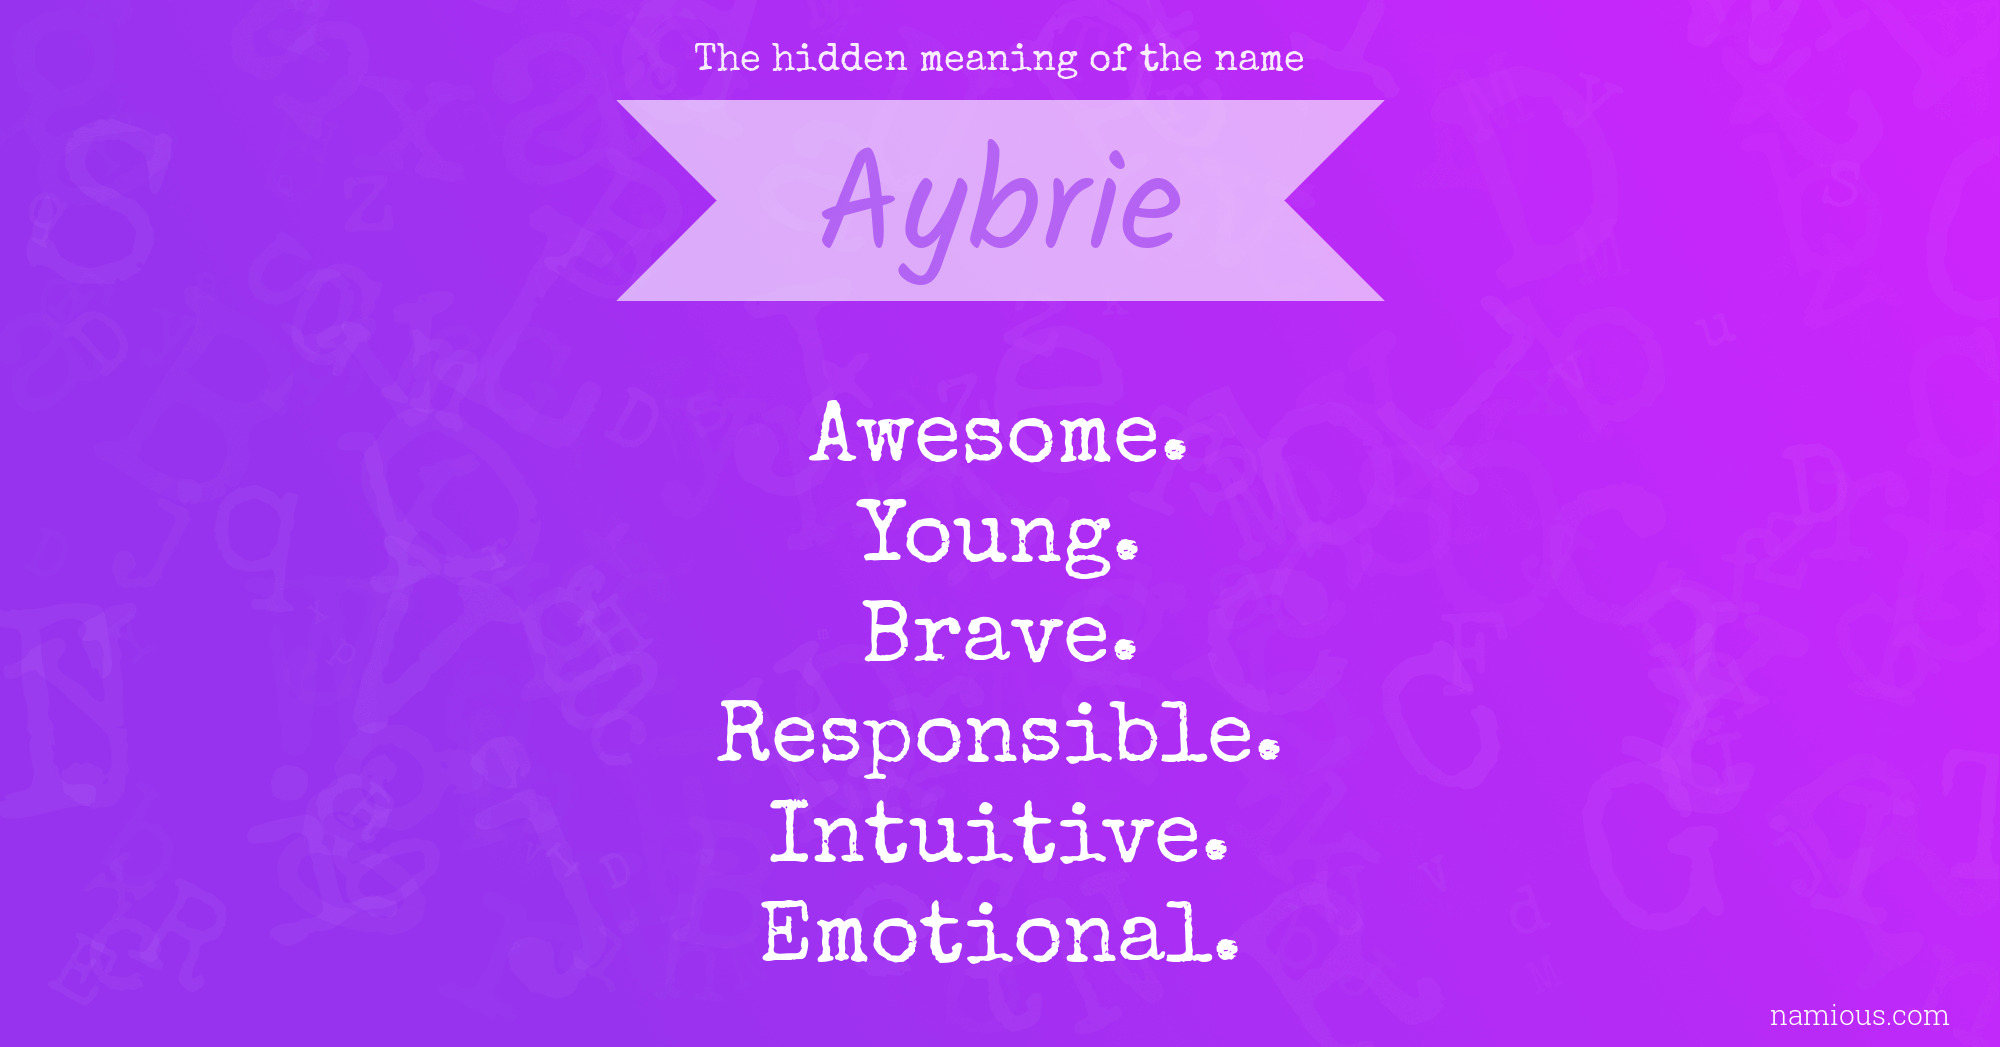 The hidden meaning of the name Aybrie